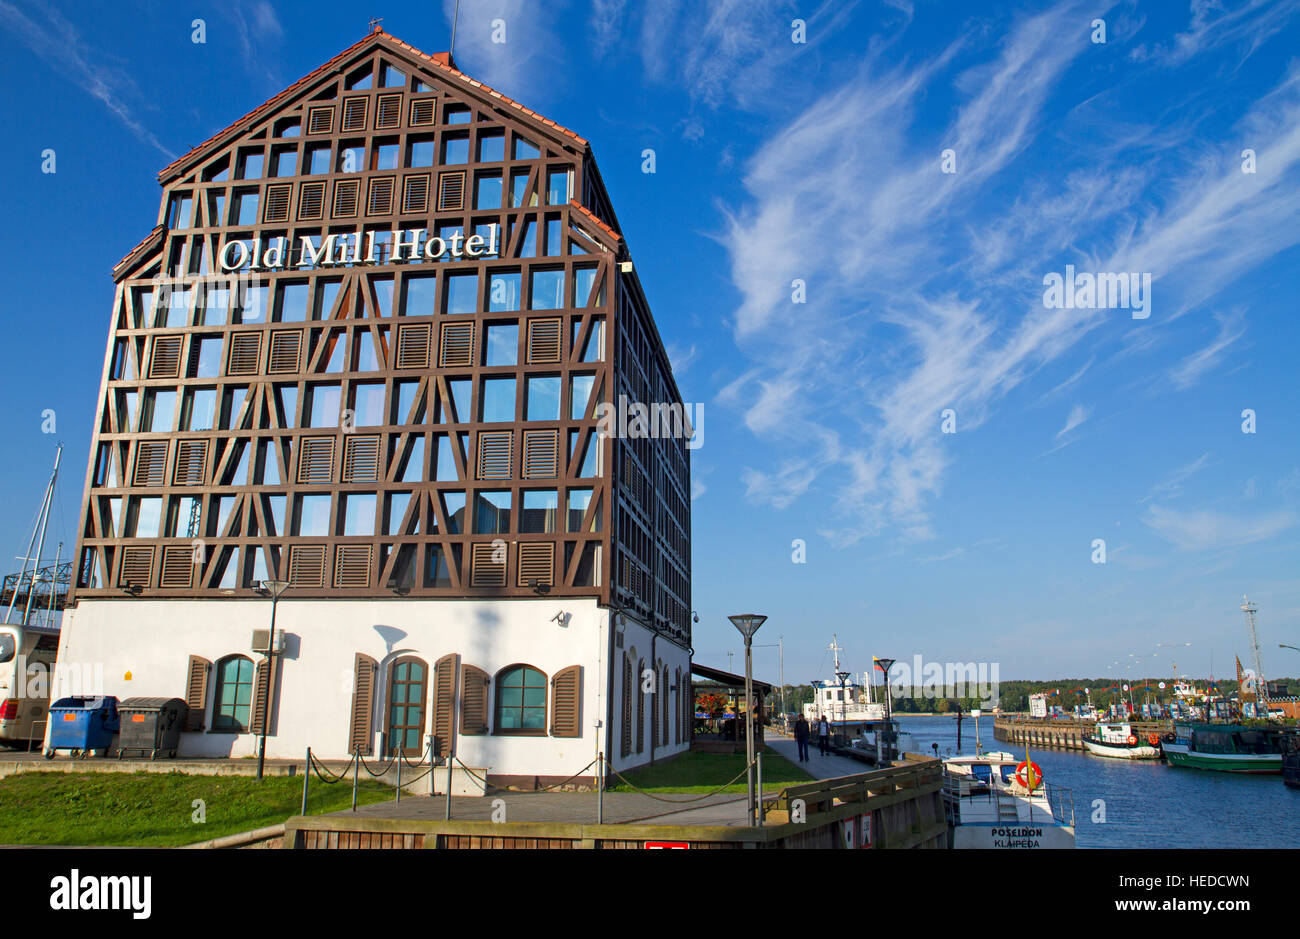 Hotel along the canal in Klaipeda Stock Photo